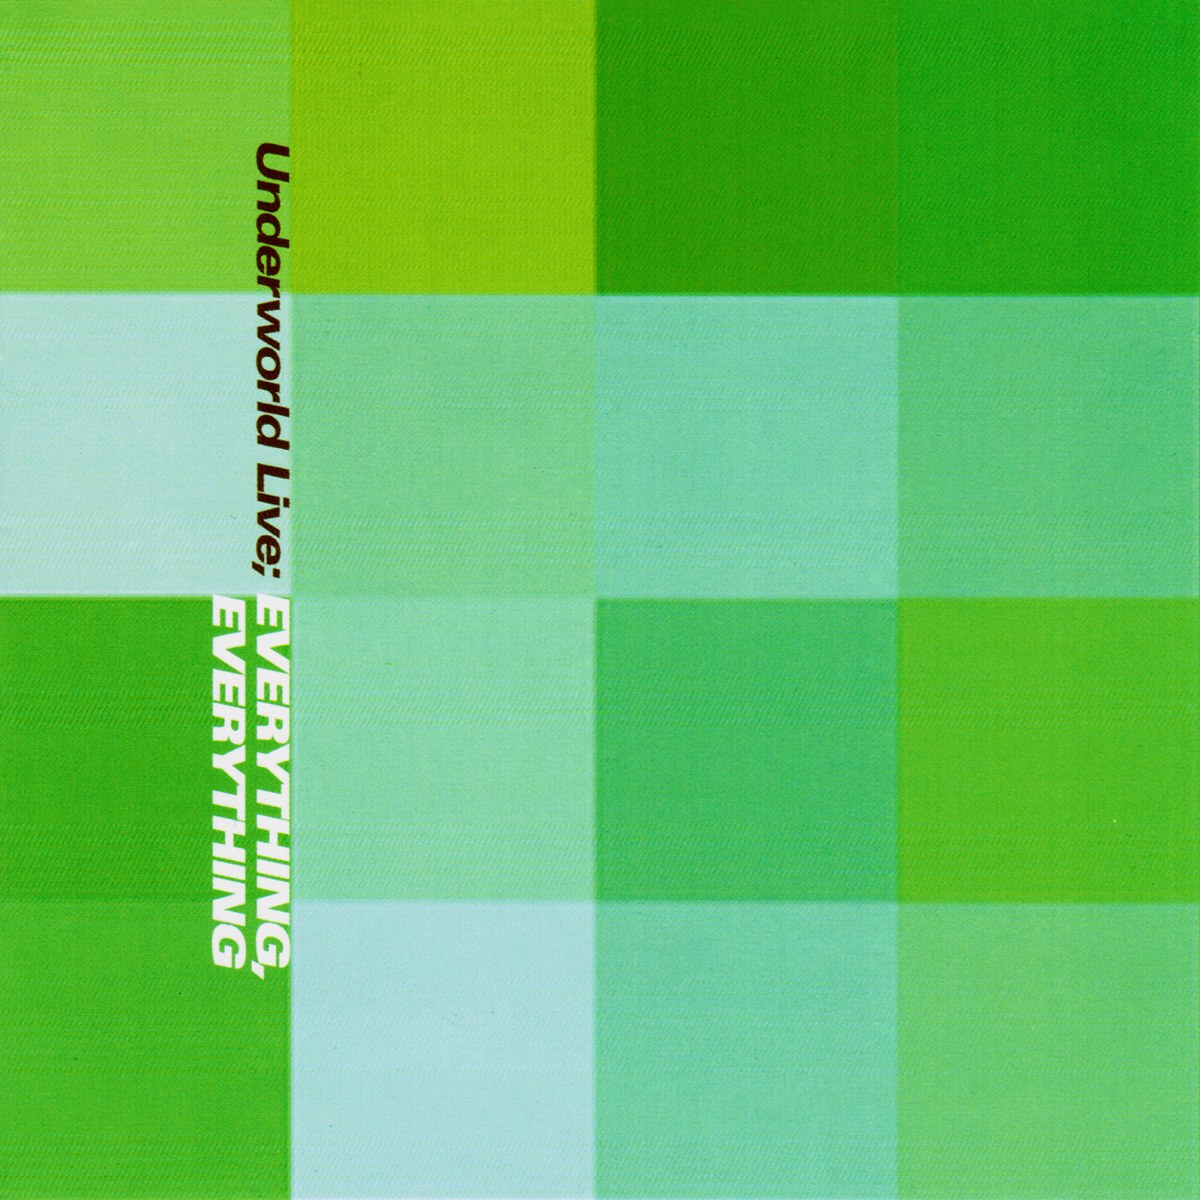 Album cover art of Underworld live Everything, Everything (2000). Bold title text in black and white on grid of squares in shades of green and yellow. Design by Tomato.